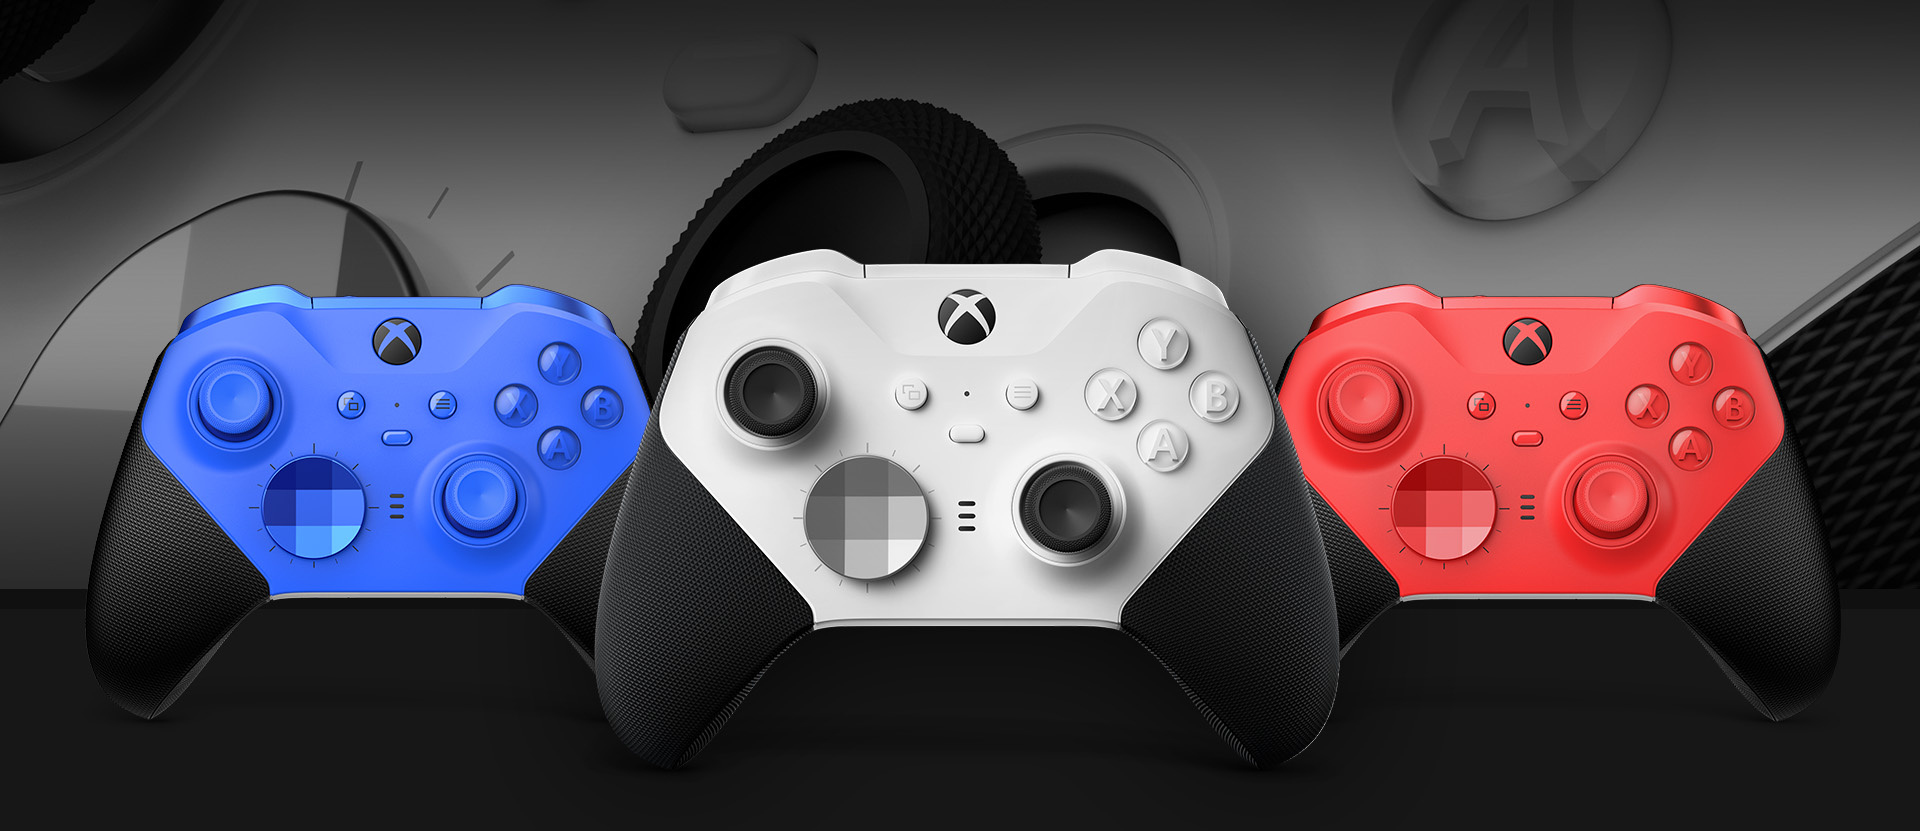 Front view of the Xbox Elite Wireless Controller Series 2 – Core (White) with other color options shown alongside. A close up of the controller thumbsticks and textured grip is in the background.